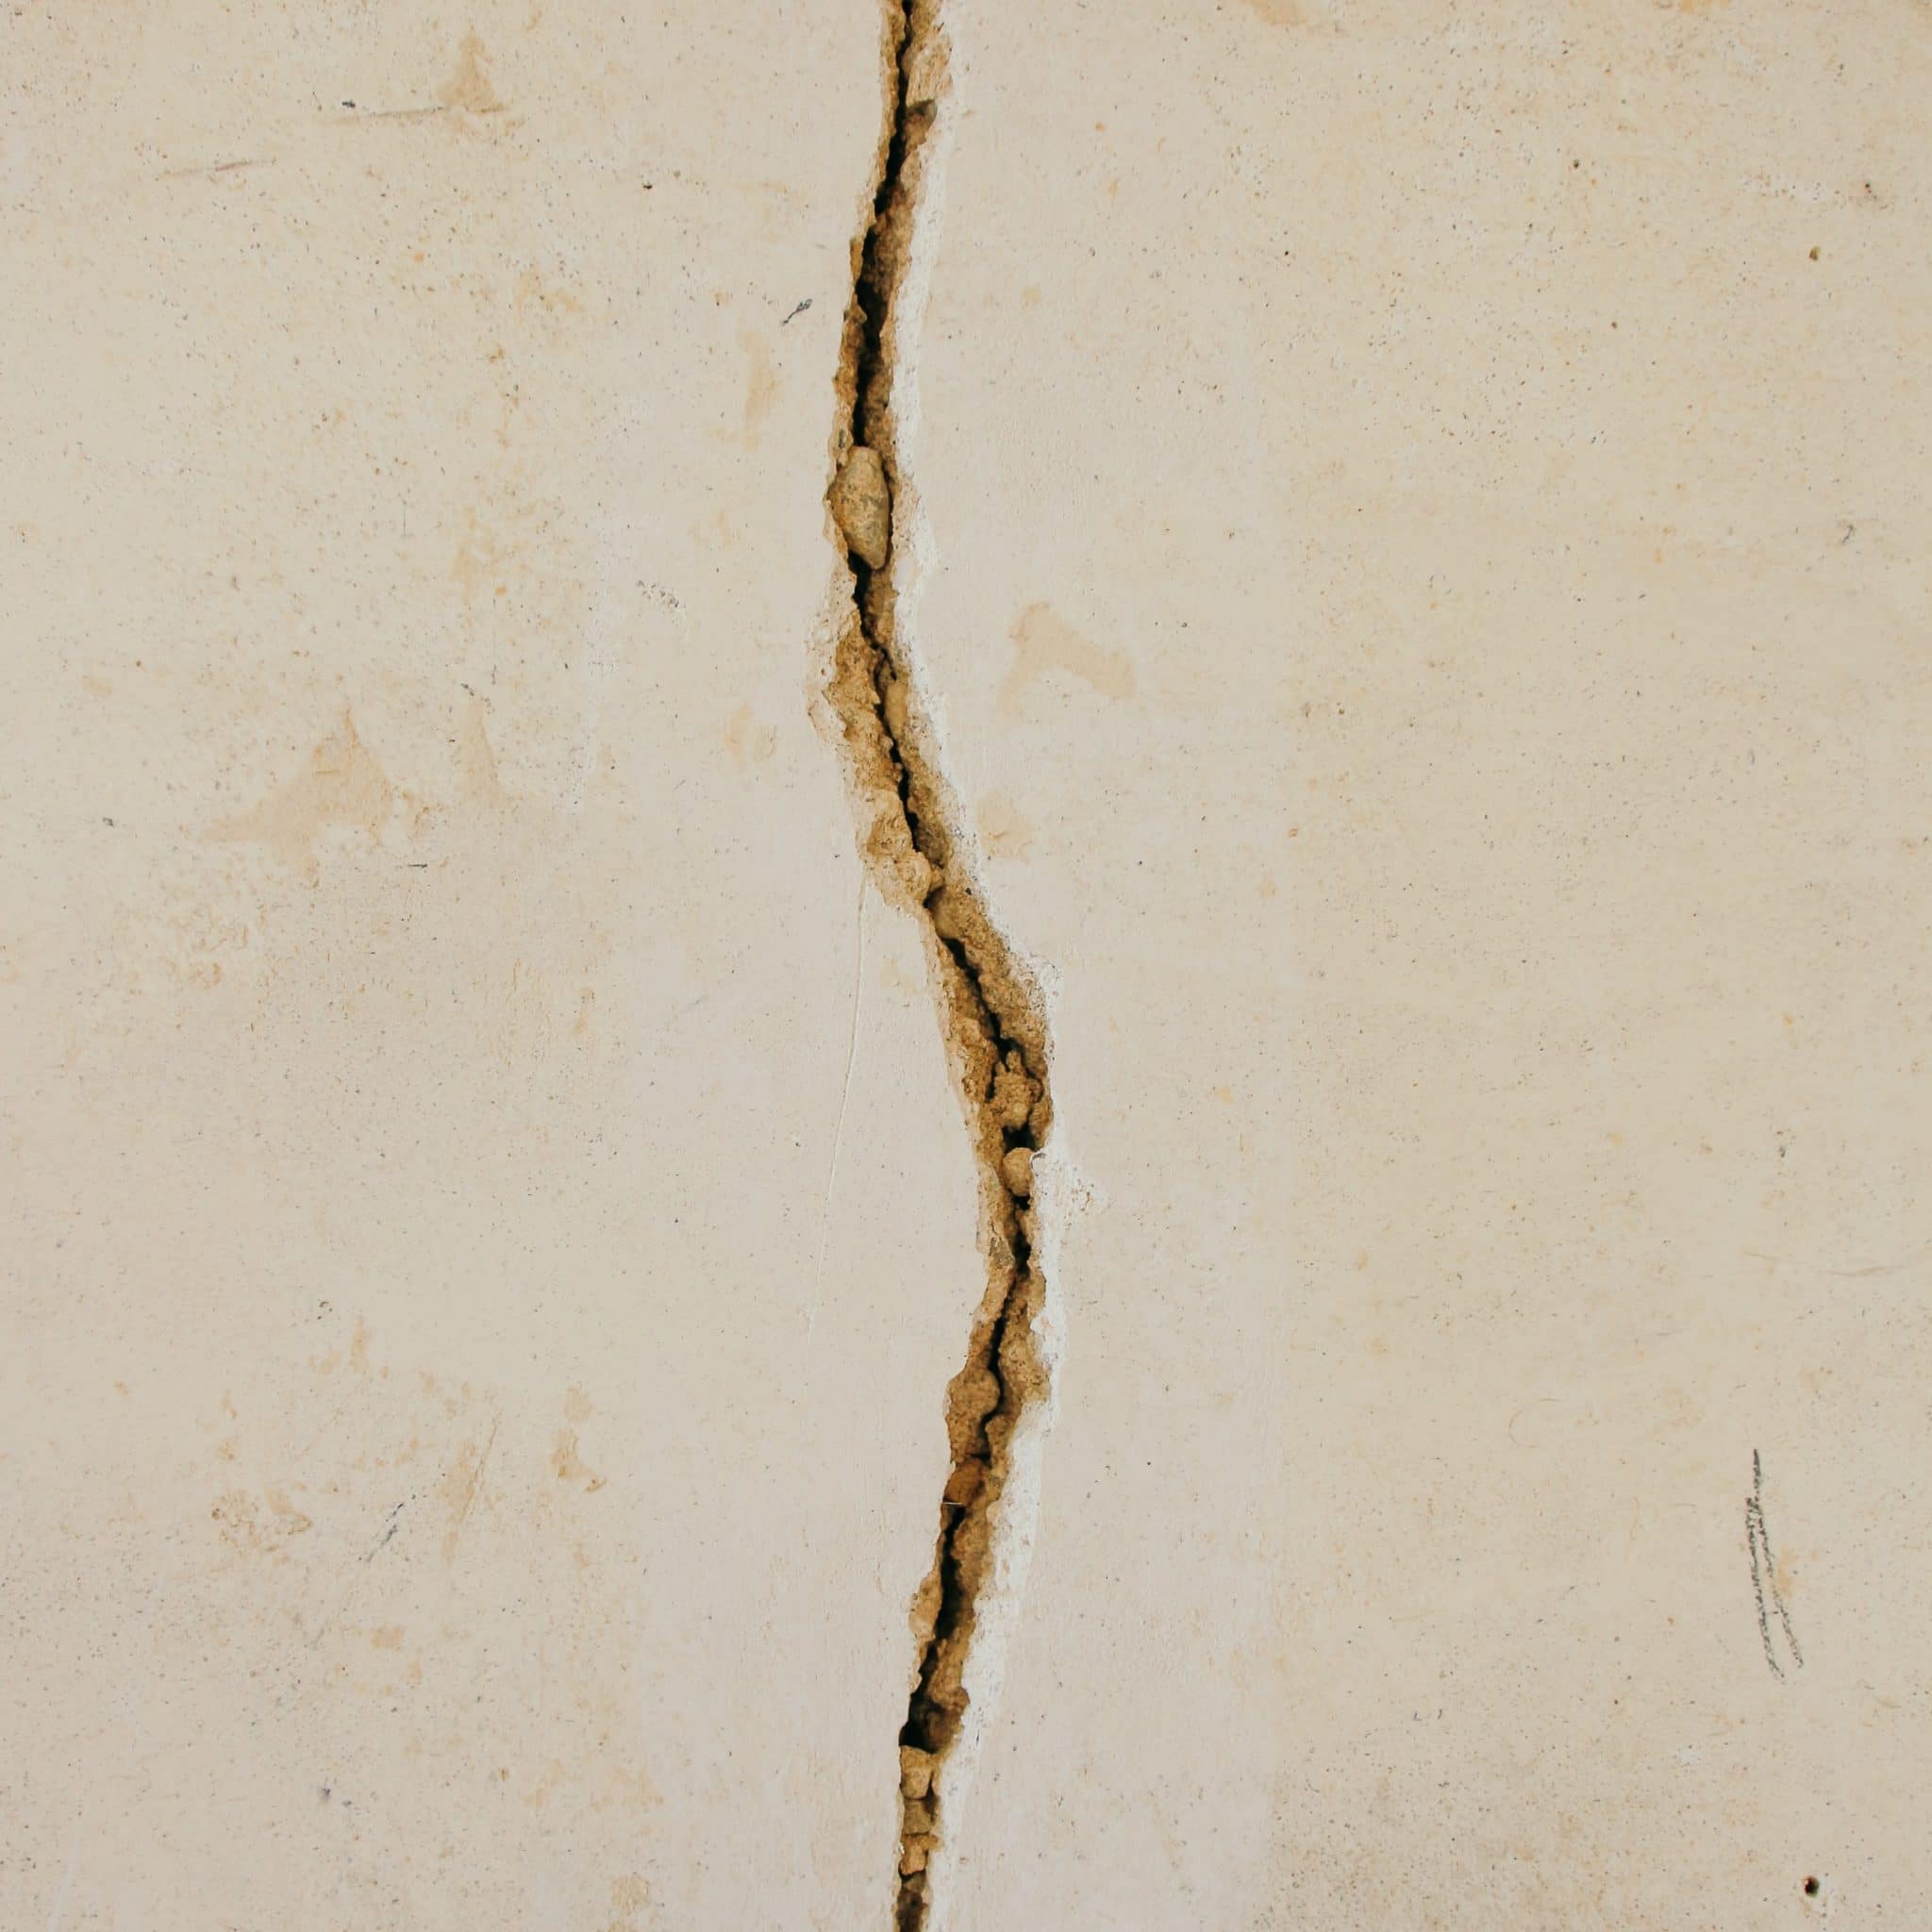 Tan wall with vertical foundation crack running down center